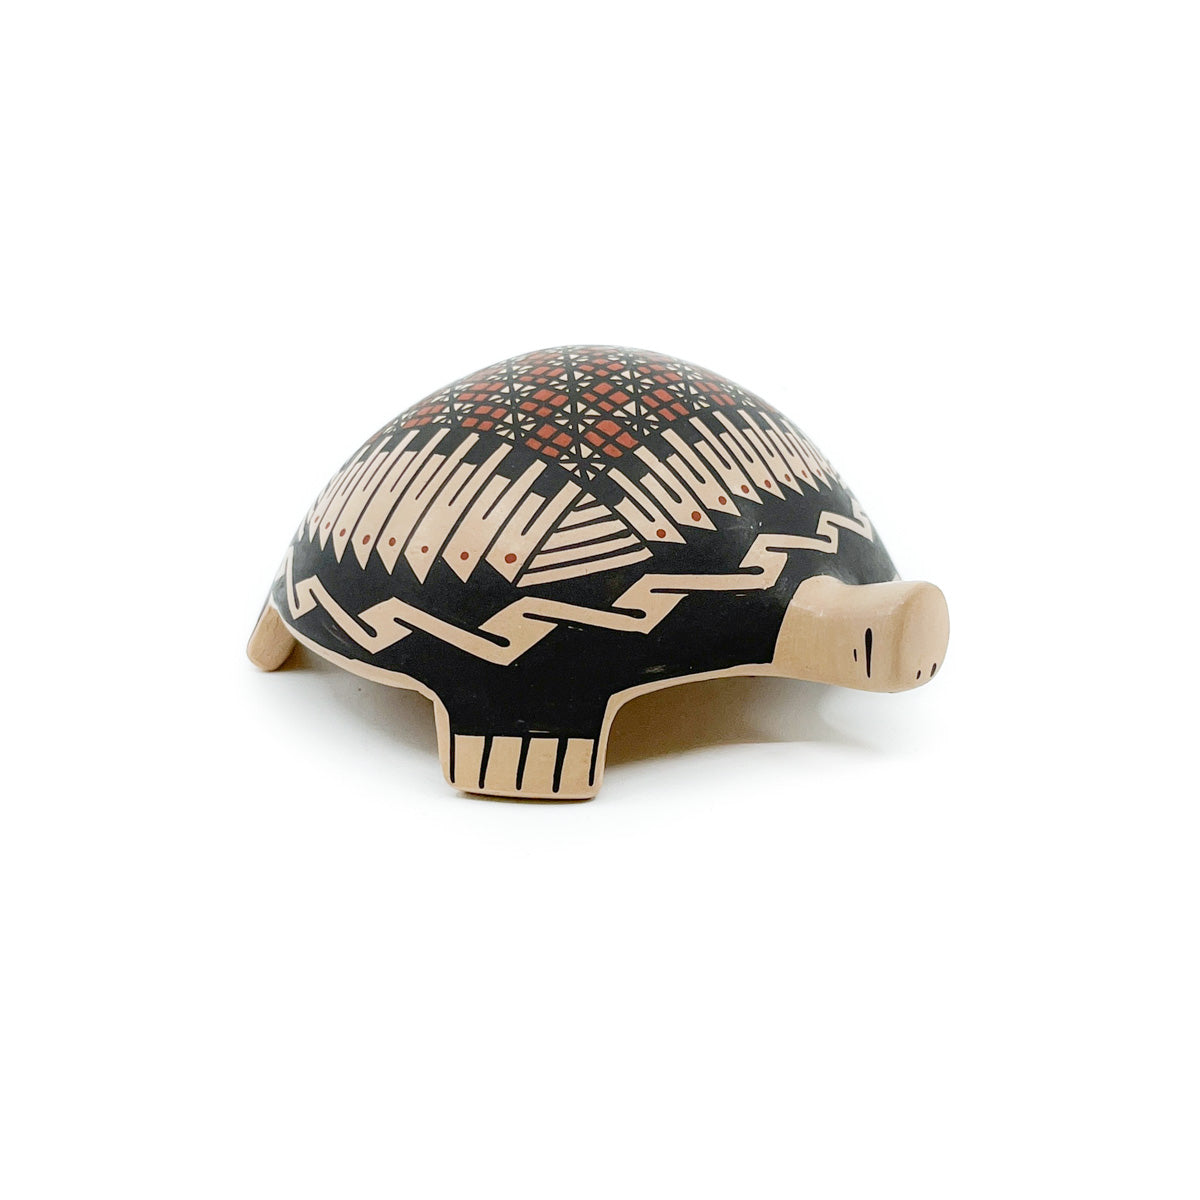 Small Turtle Sculpture with Checkerboard and Feather Motif